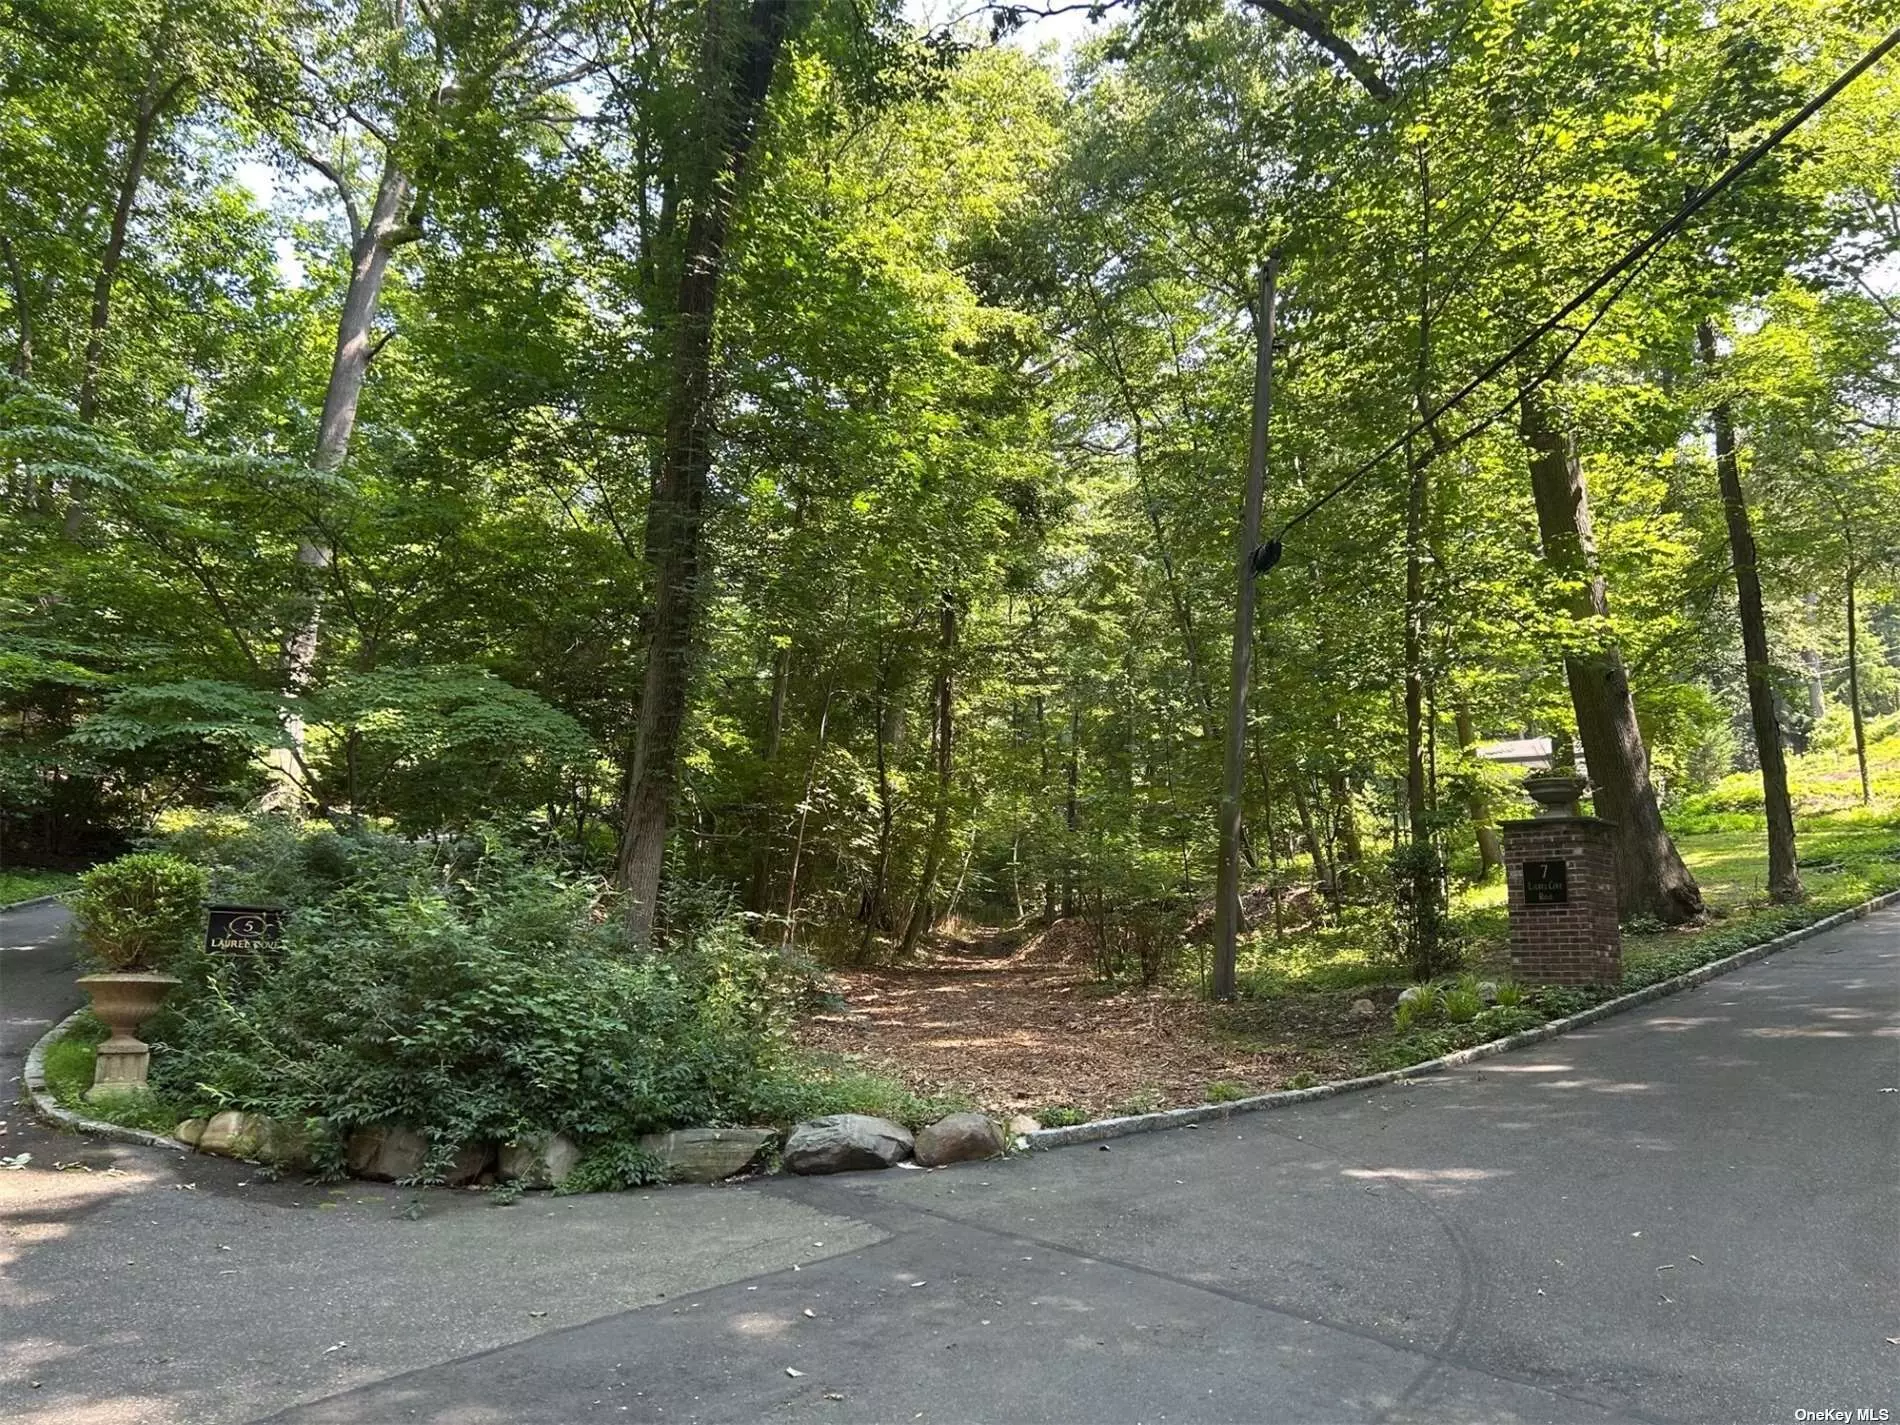 Build your dream home on secluded 2+ Acre lot in Oyster Bay Cove. Close to Historic Oyster Bay and neighboring towns. Enjoy access to the Oyster Bay Cove private beach as well as Laurel Cove private beach.